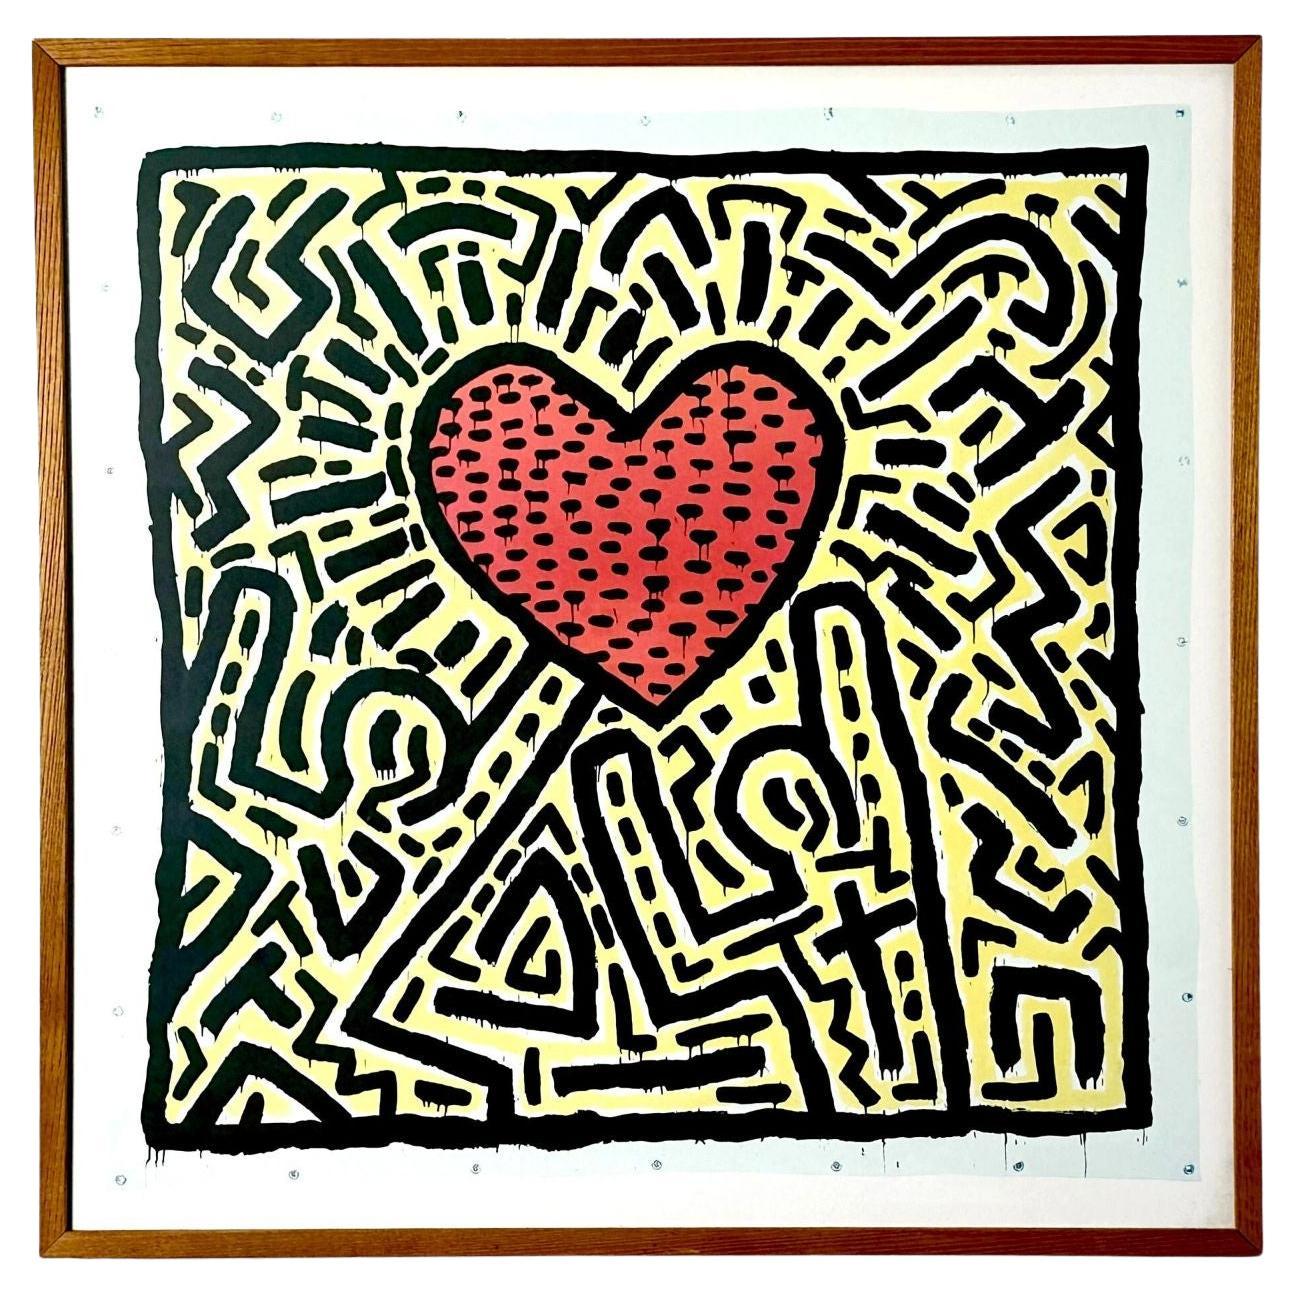 Pop Art Two Figures and Heart Abstract Framed Print by Keith Haring 1982 For Sale